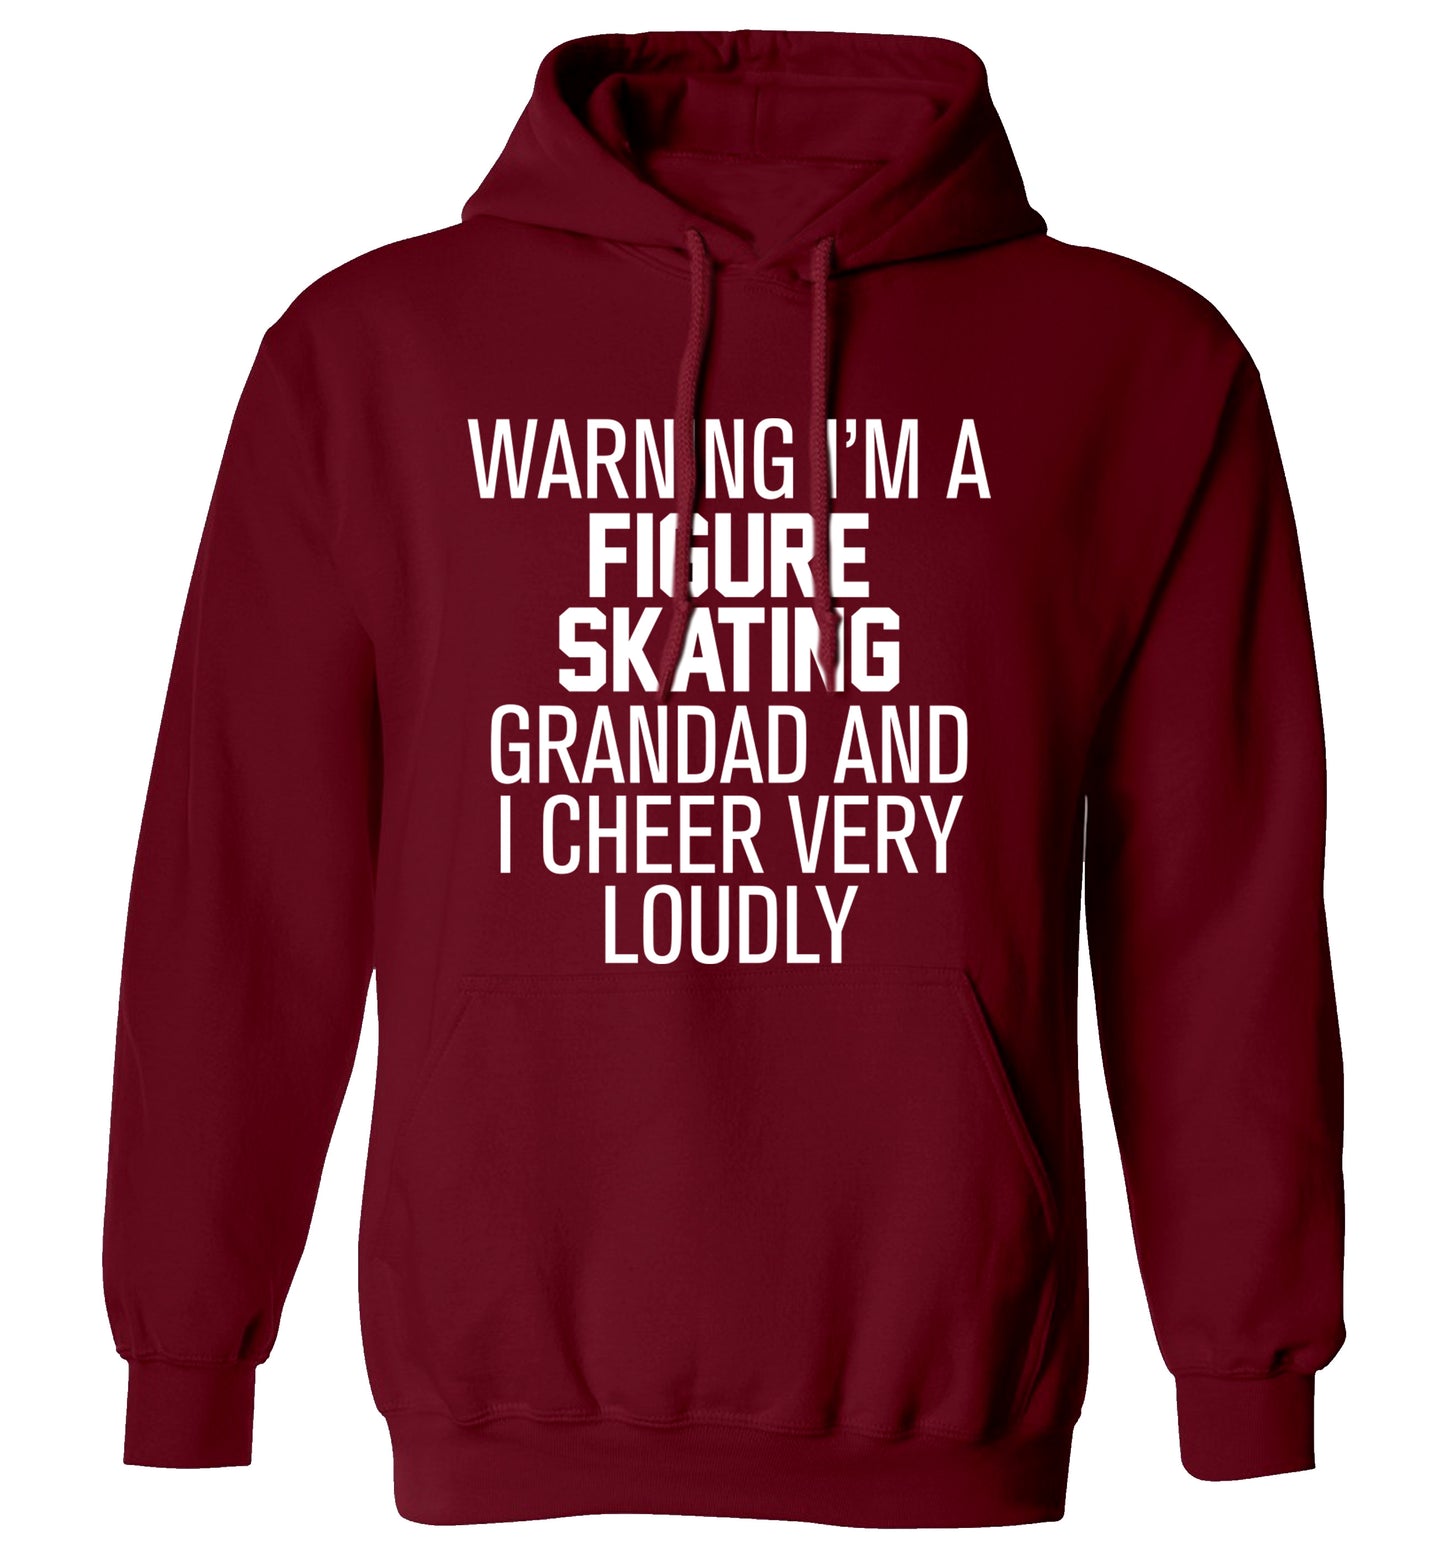 Warning I'm a figure skating grandad and I cheer very loudly adults unisexmaroon hoodie 2XL